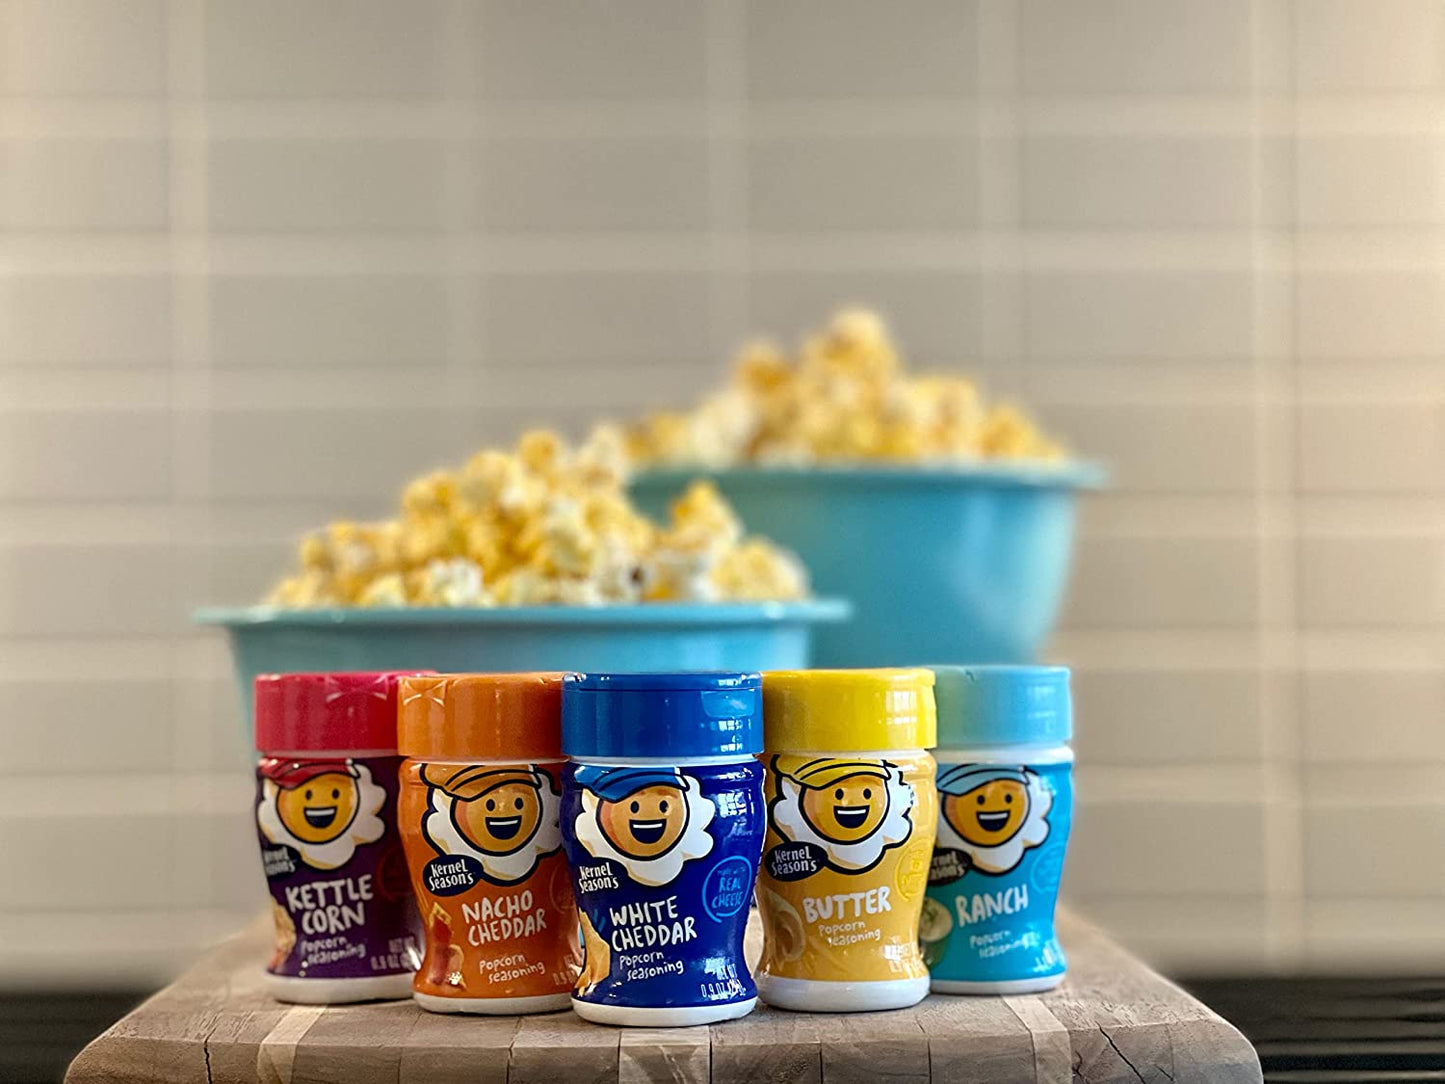 Five various flavored popcorn seasoning jars with two bowls of fresh popcorn in the background.